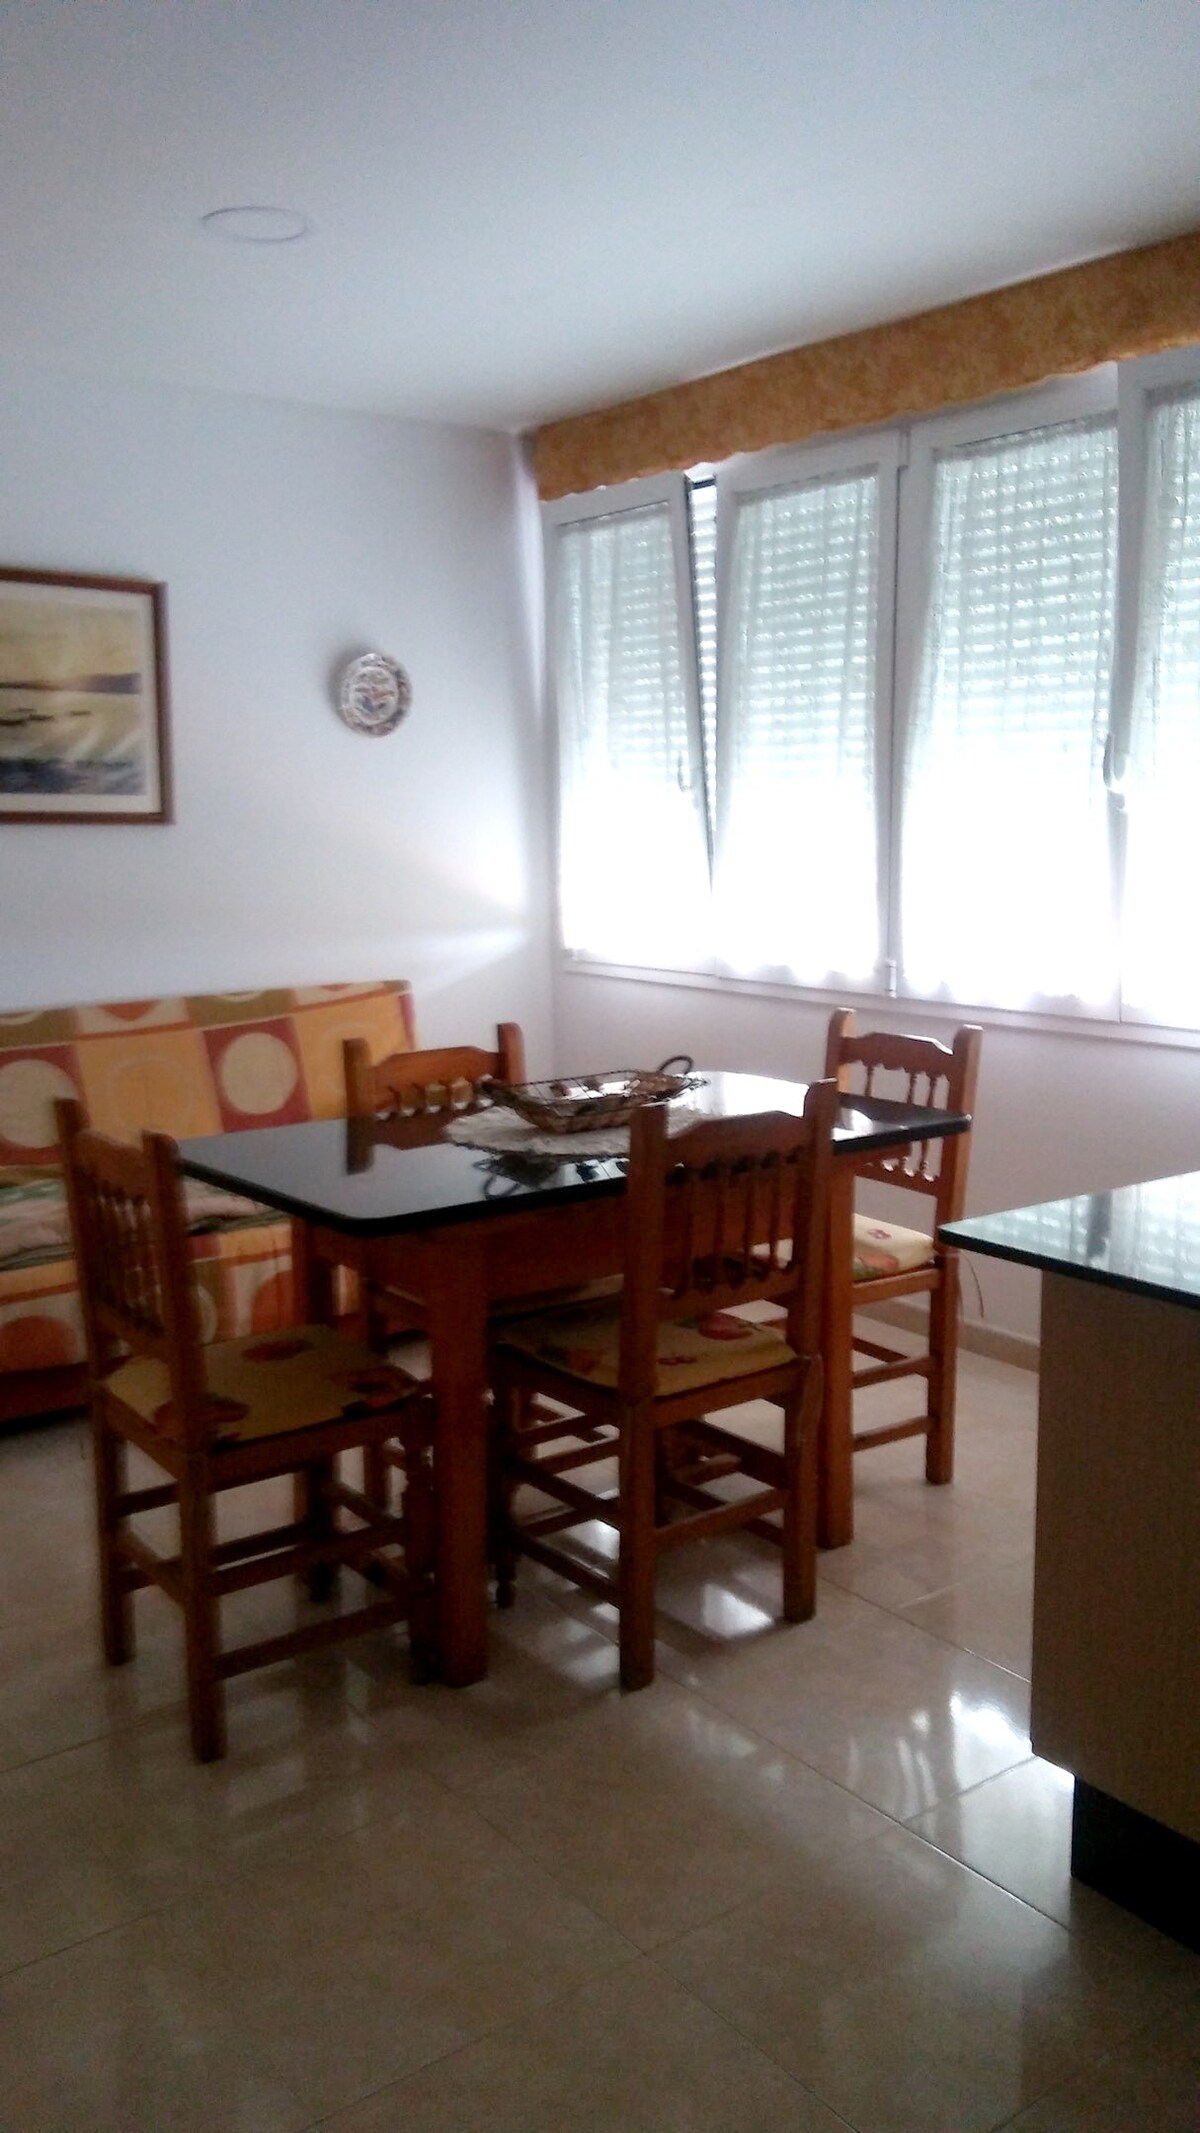 Appartement 1 km away from the beach for 4 ppl.